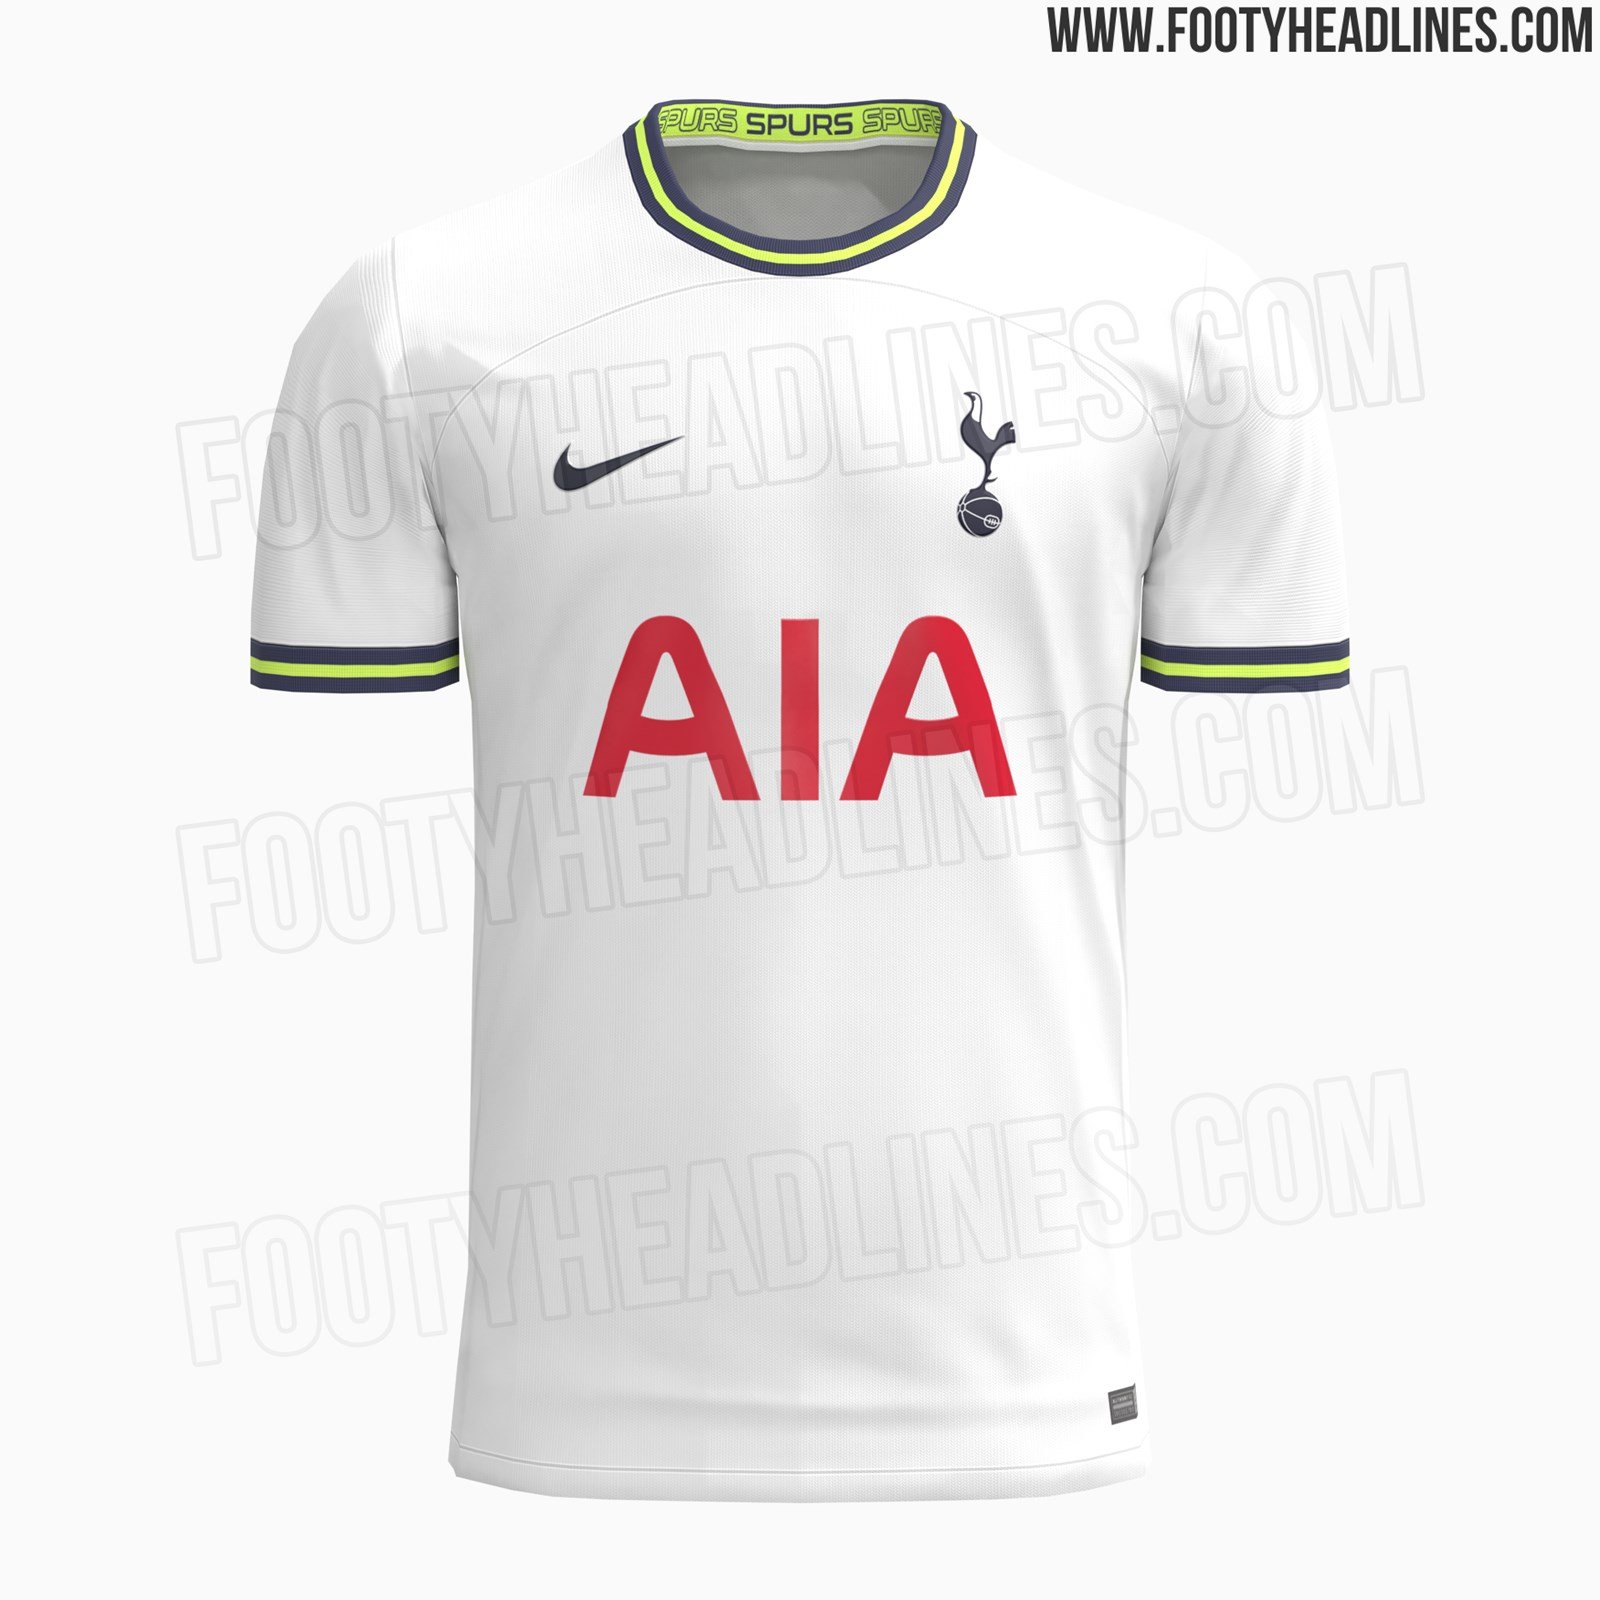 LEAKED: Tottenham 21-22 Away Kit To Feature This Insane Design +